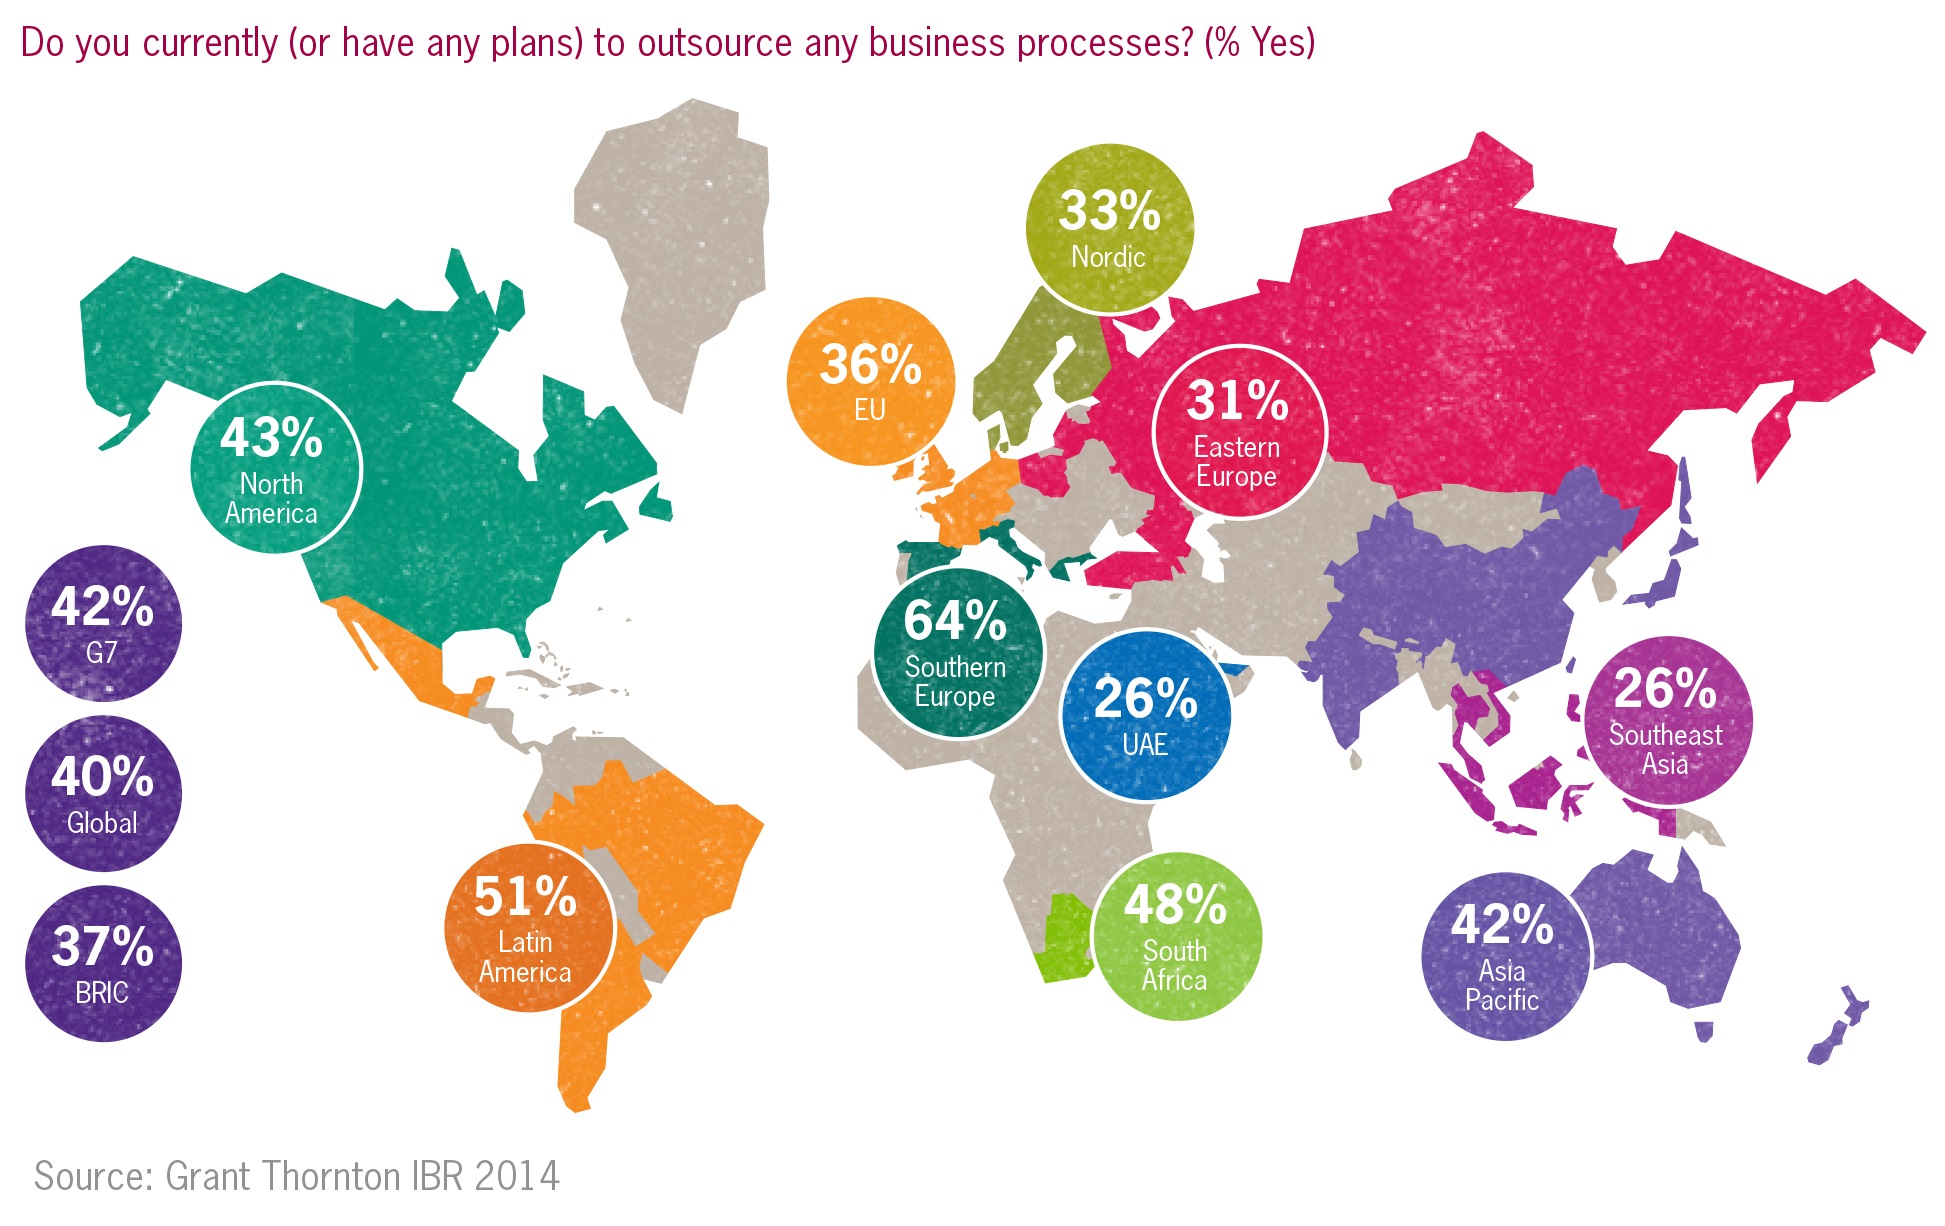 IBR Grant thornton global map businesses plan to outsource processes